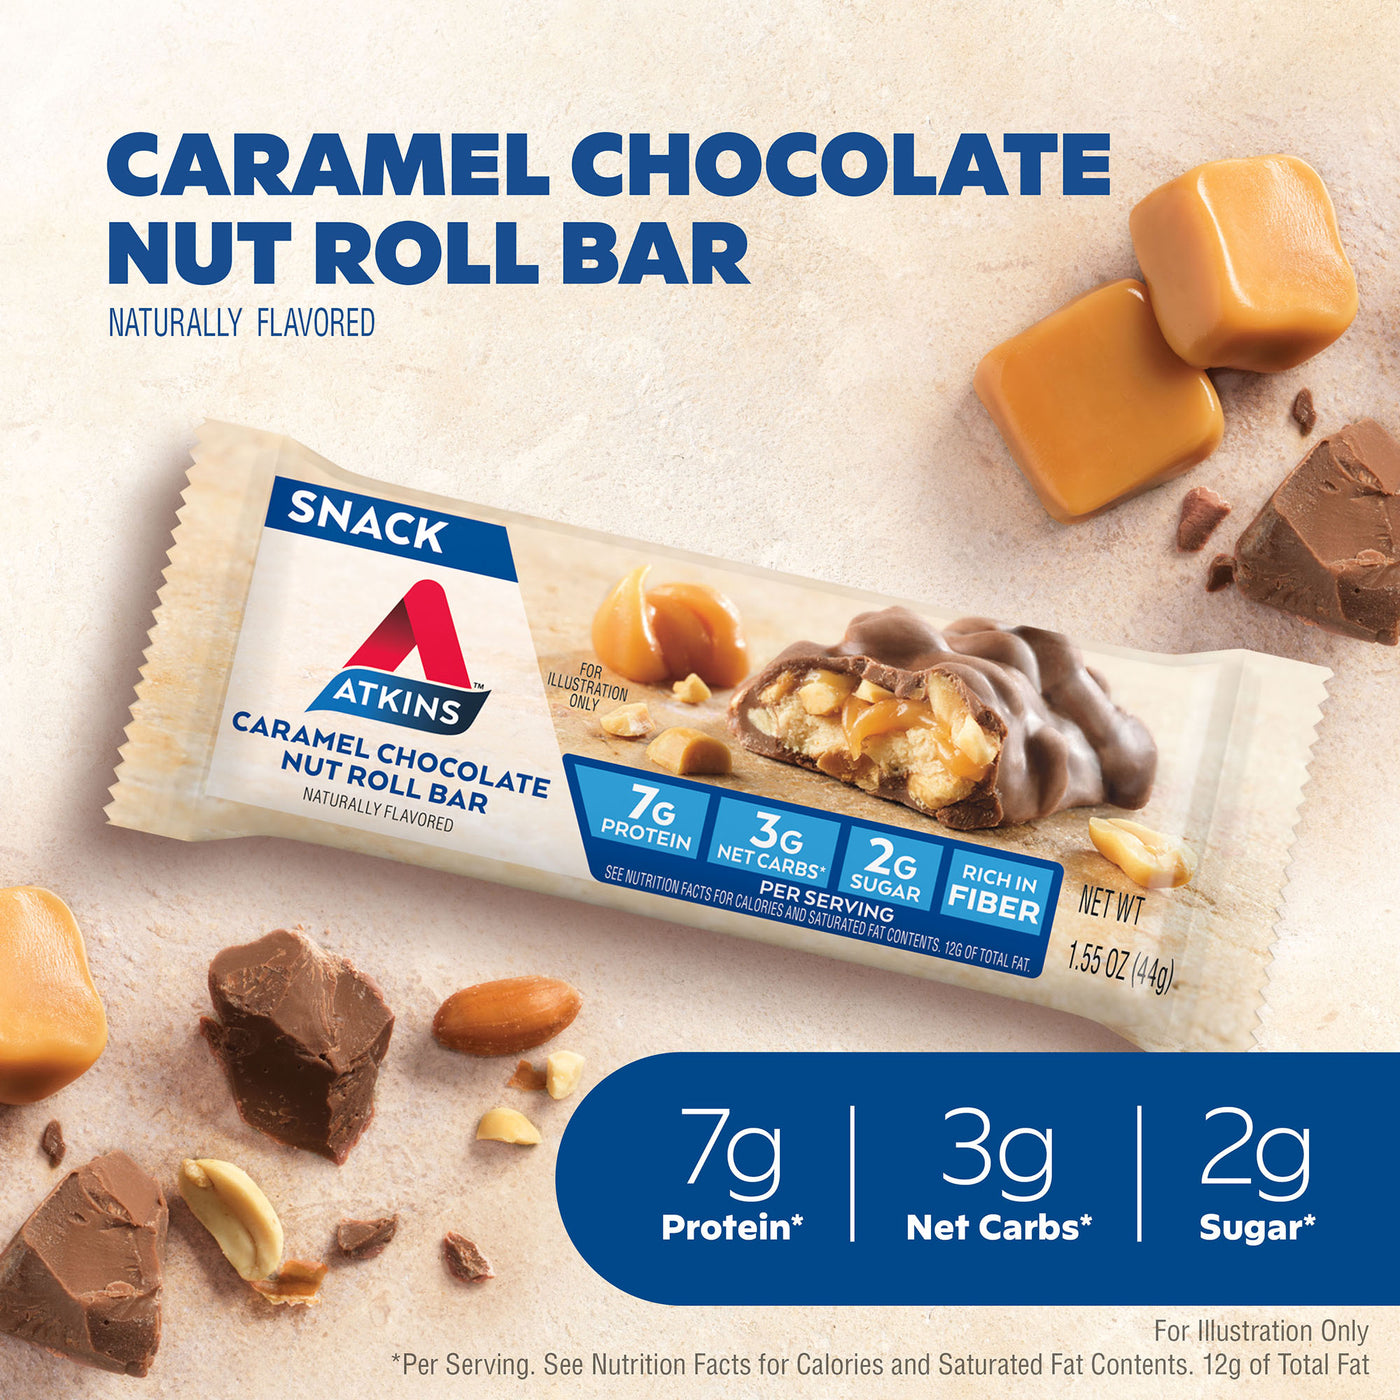 Caramel Chocolate Nut Roll Bar naturally flavor. 7G Protein*. 3G Net Carbs*, 2G Sugar*. Per serving. See nutrition facts for calories and saturated fat contents. 12G of total fat. For illustration only.